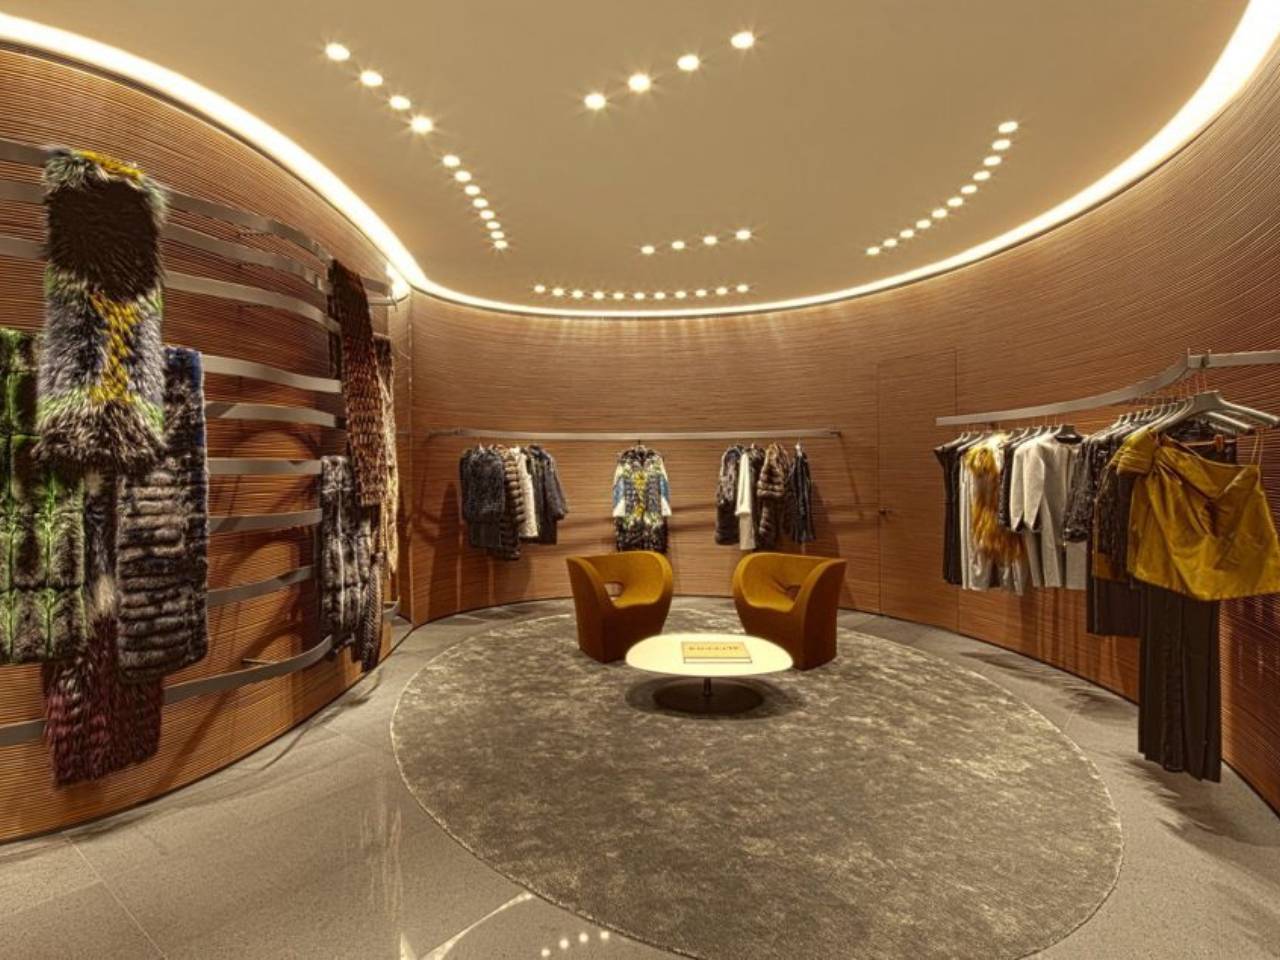 Fendi's first standalone men's store in Southeast Asia opens in Singapore